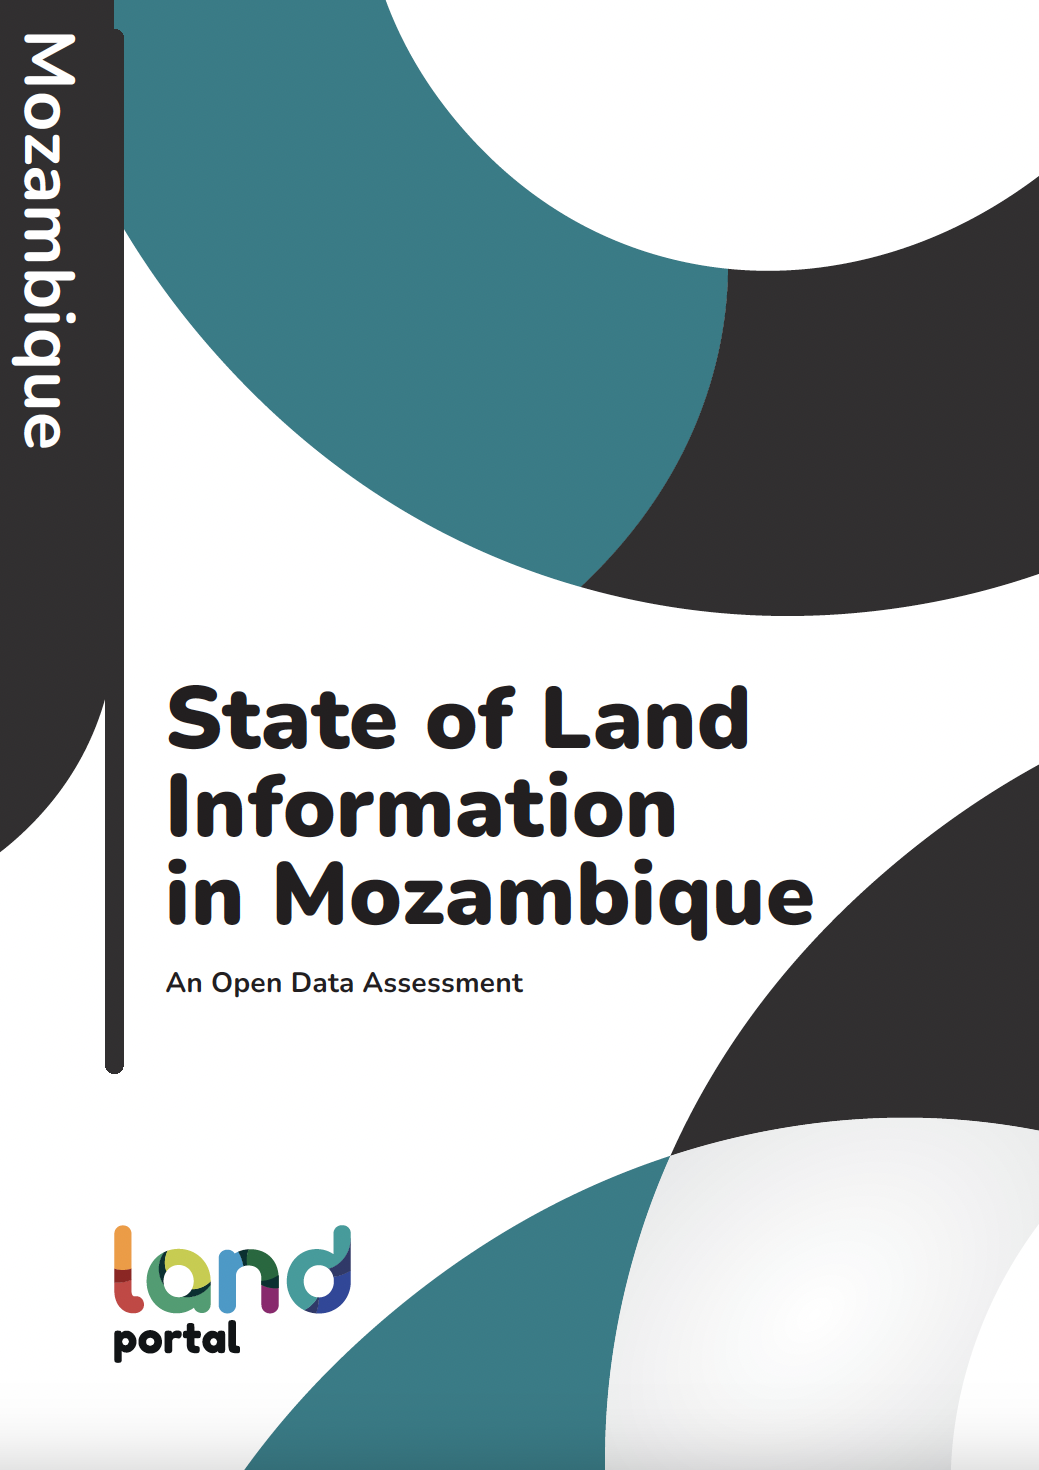 State of Land Information in Mozambique